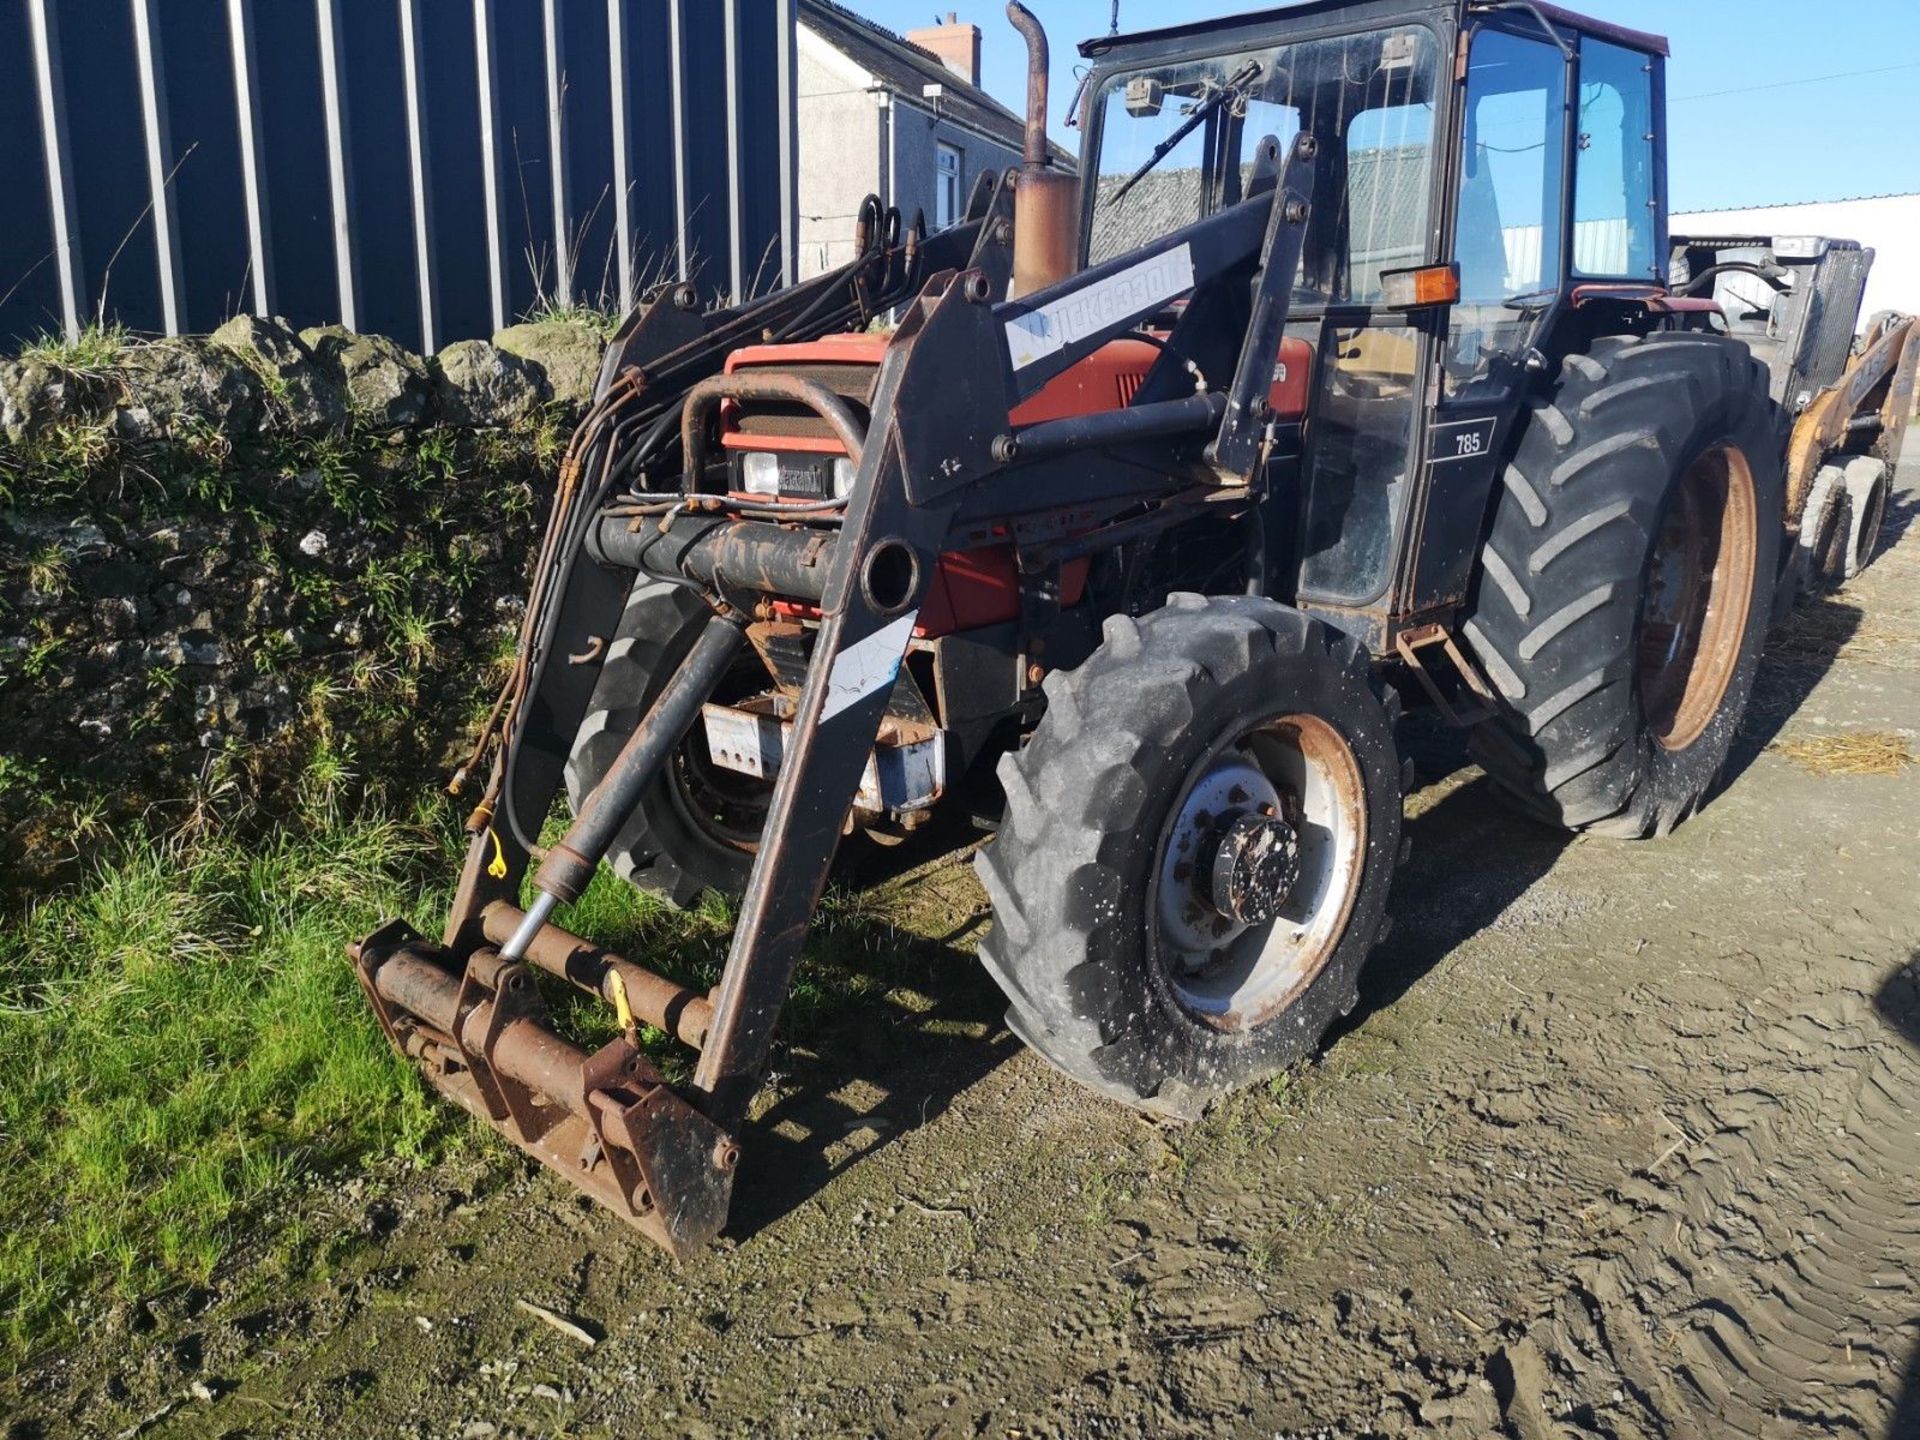 Case International 785 L Tractor And Quickie Loader - Image 4 of 11